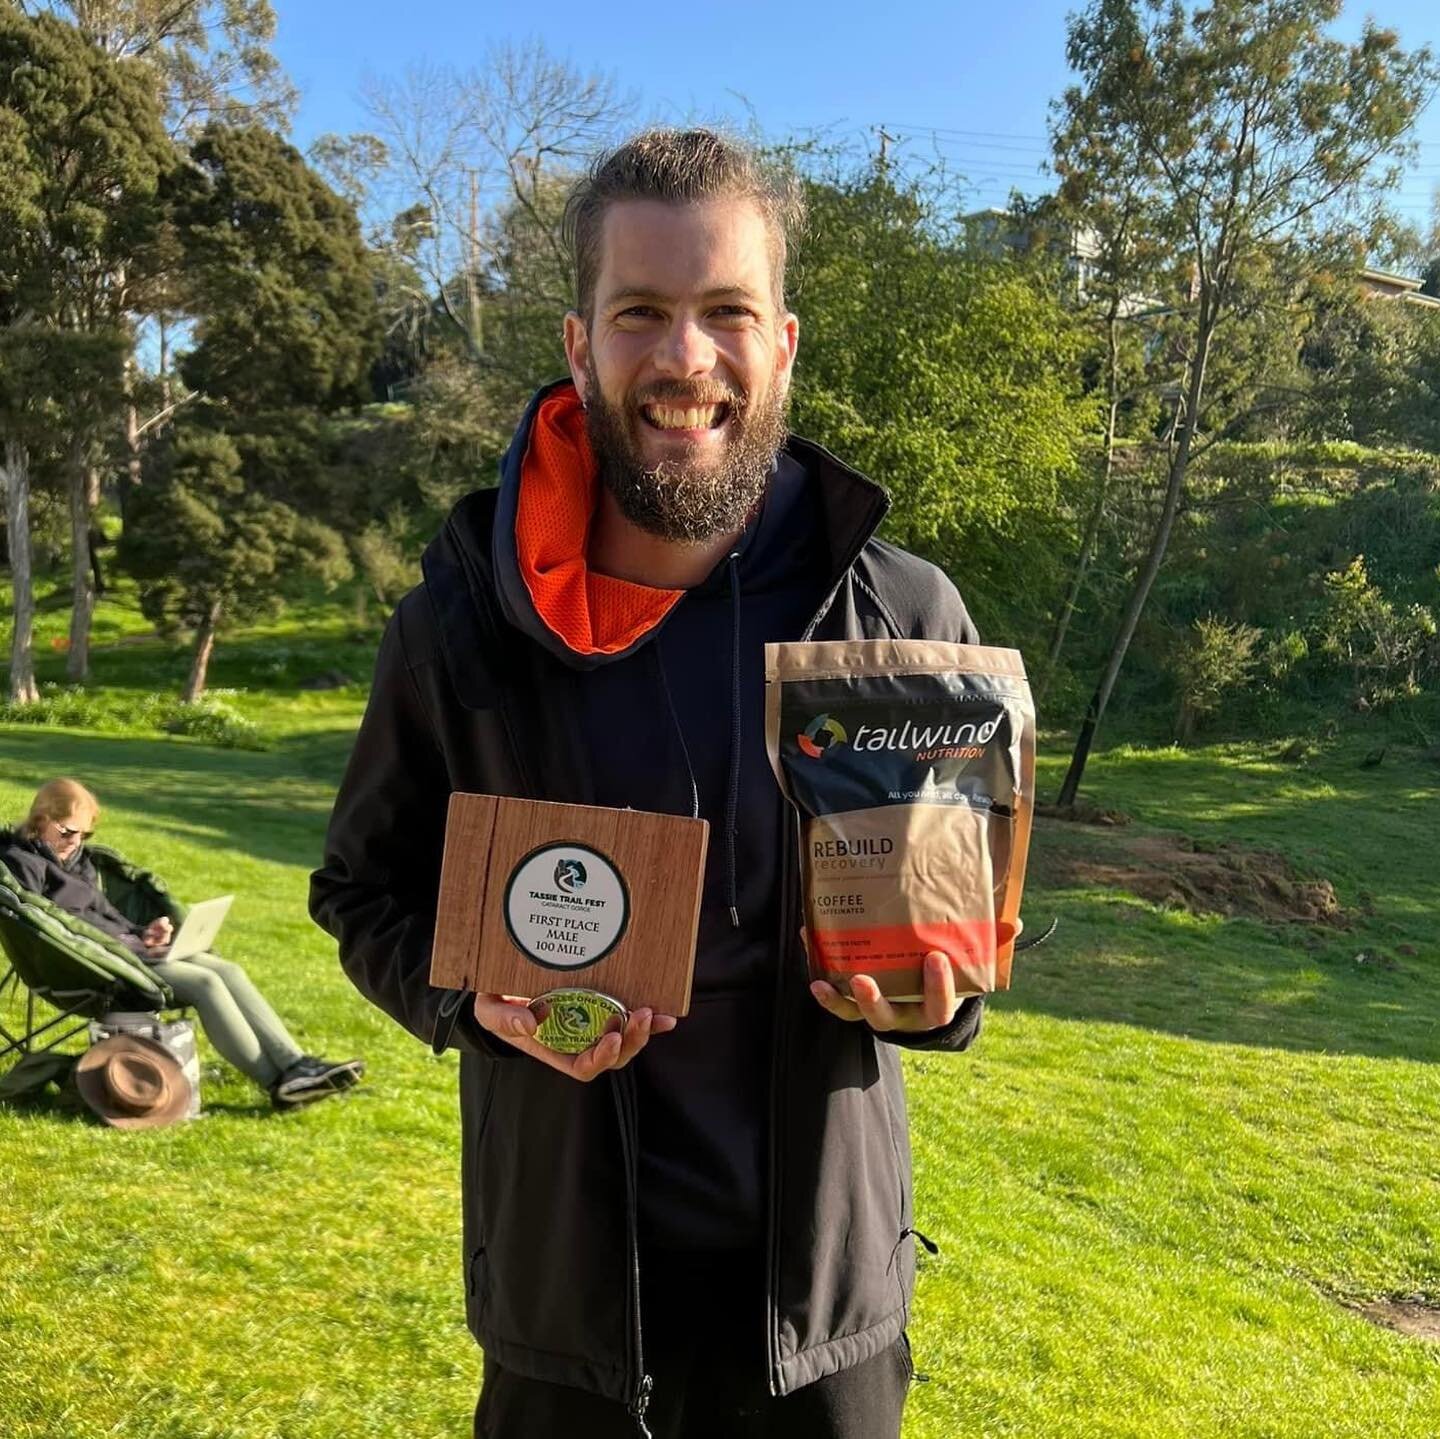 @tassietrailfest 2022: 100 mile race, 6745m elevation gain in a sub24. I finally reached my goal! I didn&rsquo;t have an easy year with an injury in May which took me out of training for more than a month, but the work has been done to recover and ke